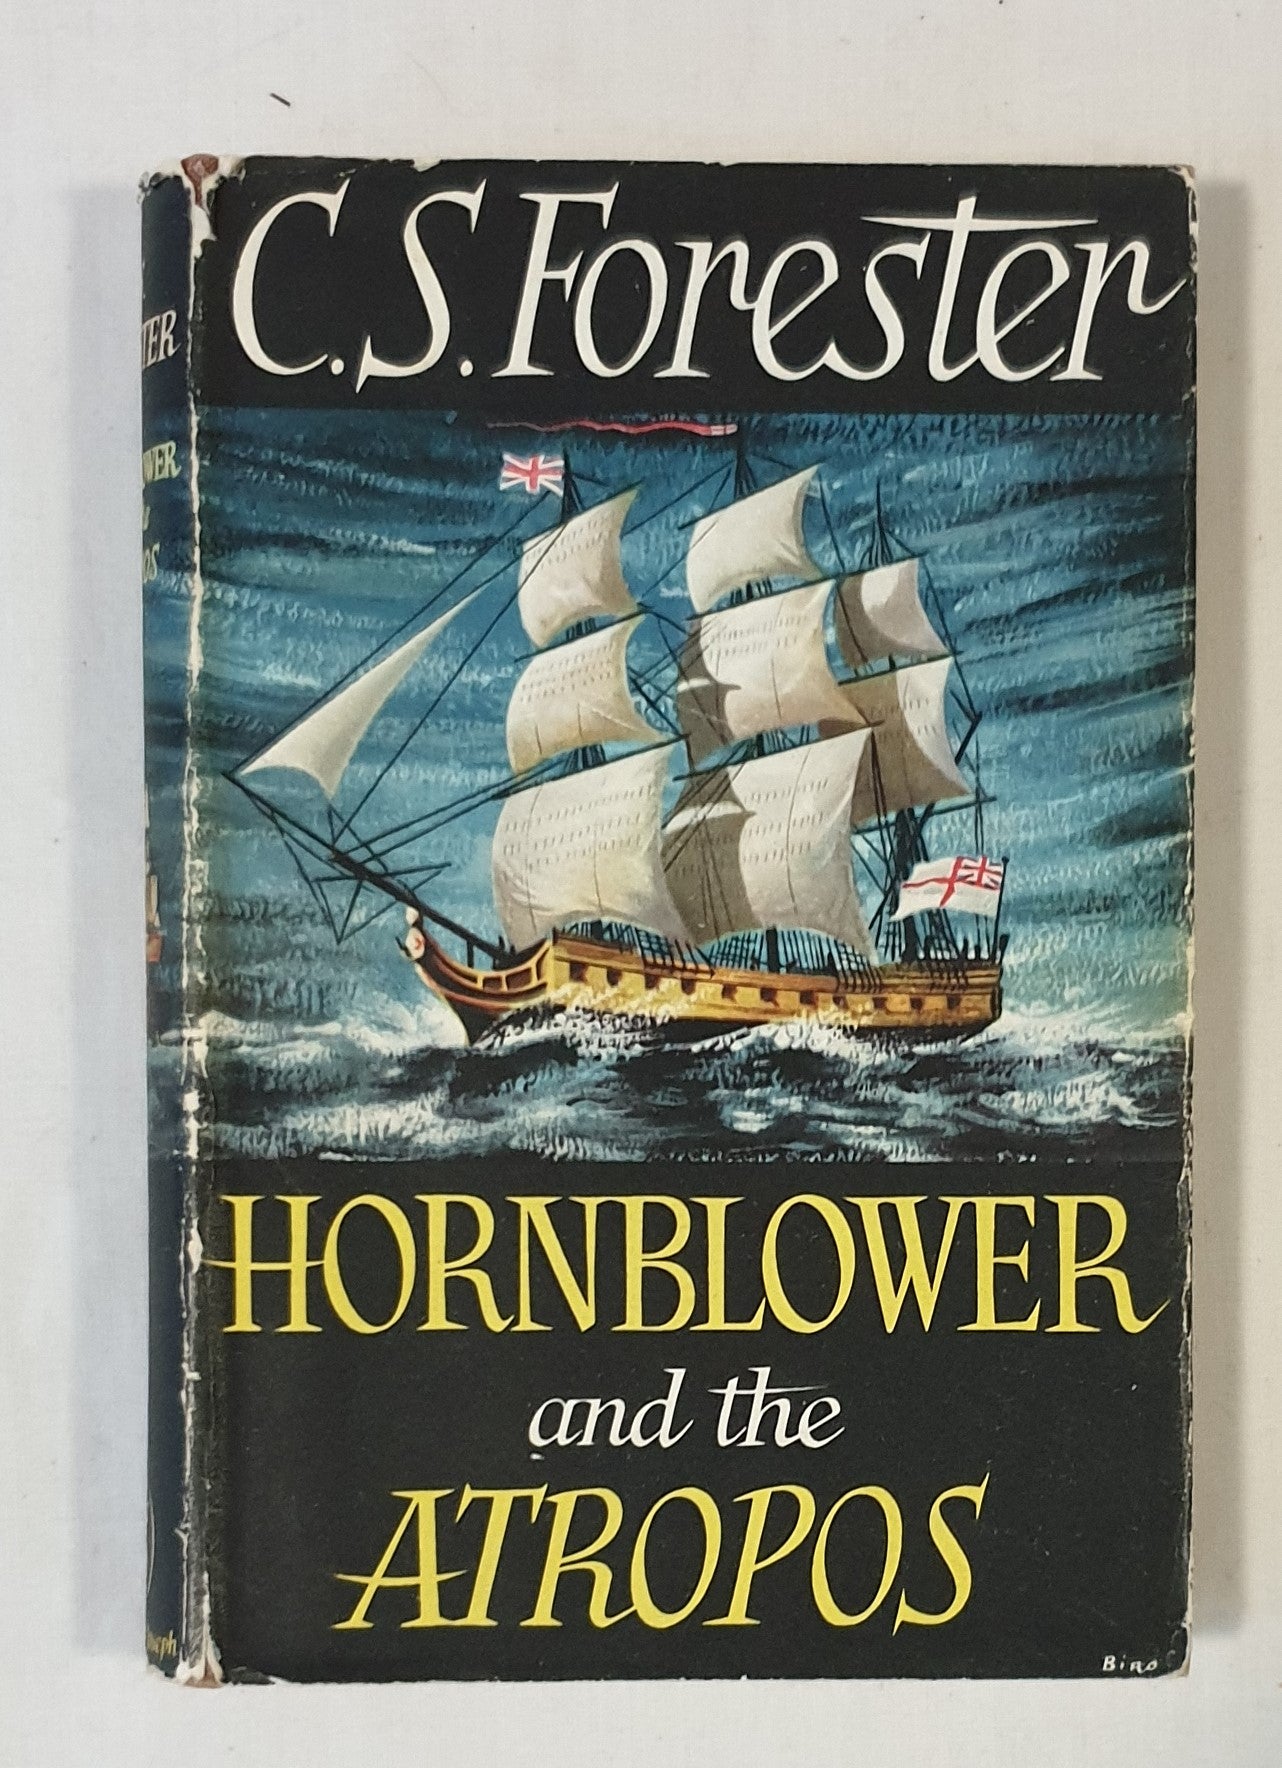 Hornblower and the Atropos by C. S. Forester